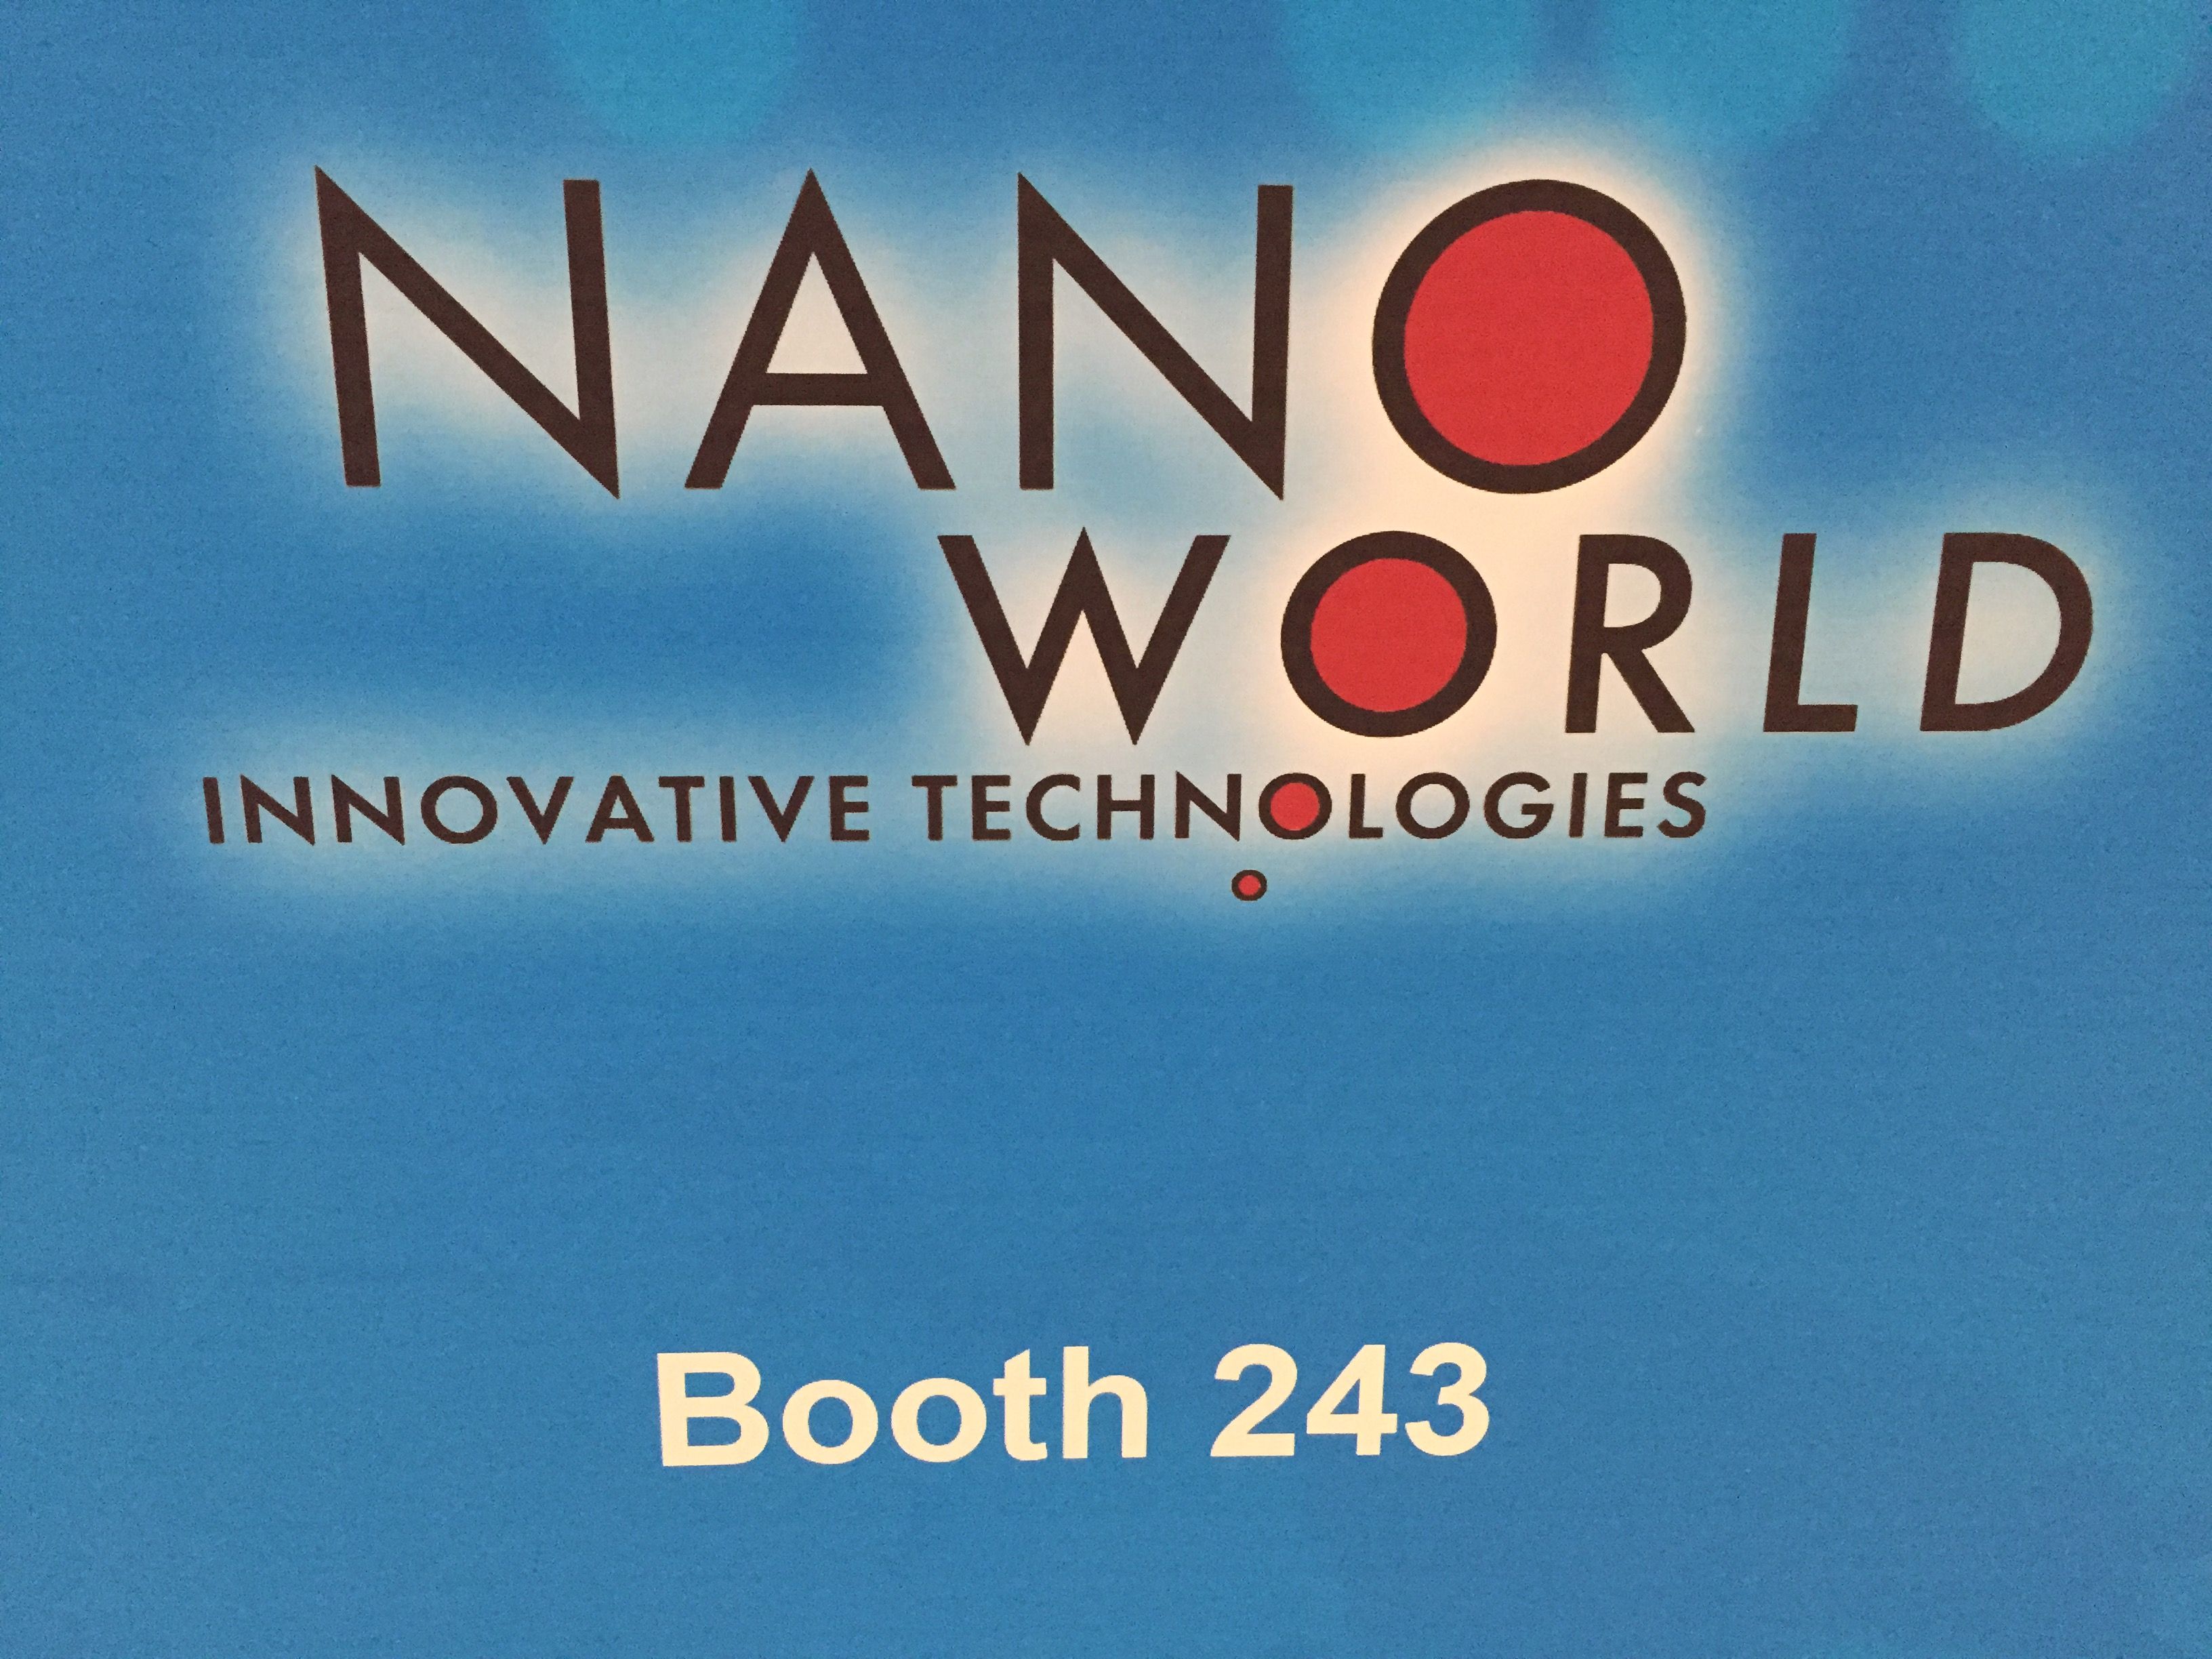 Find out more about our AFM tips at the China Nano 2015 in Beijing this week